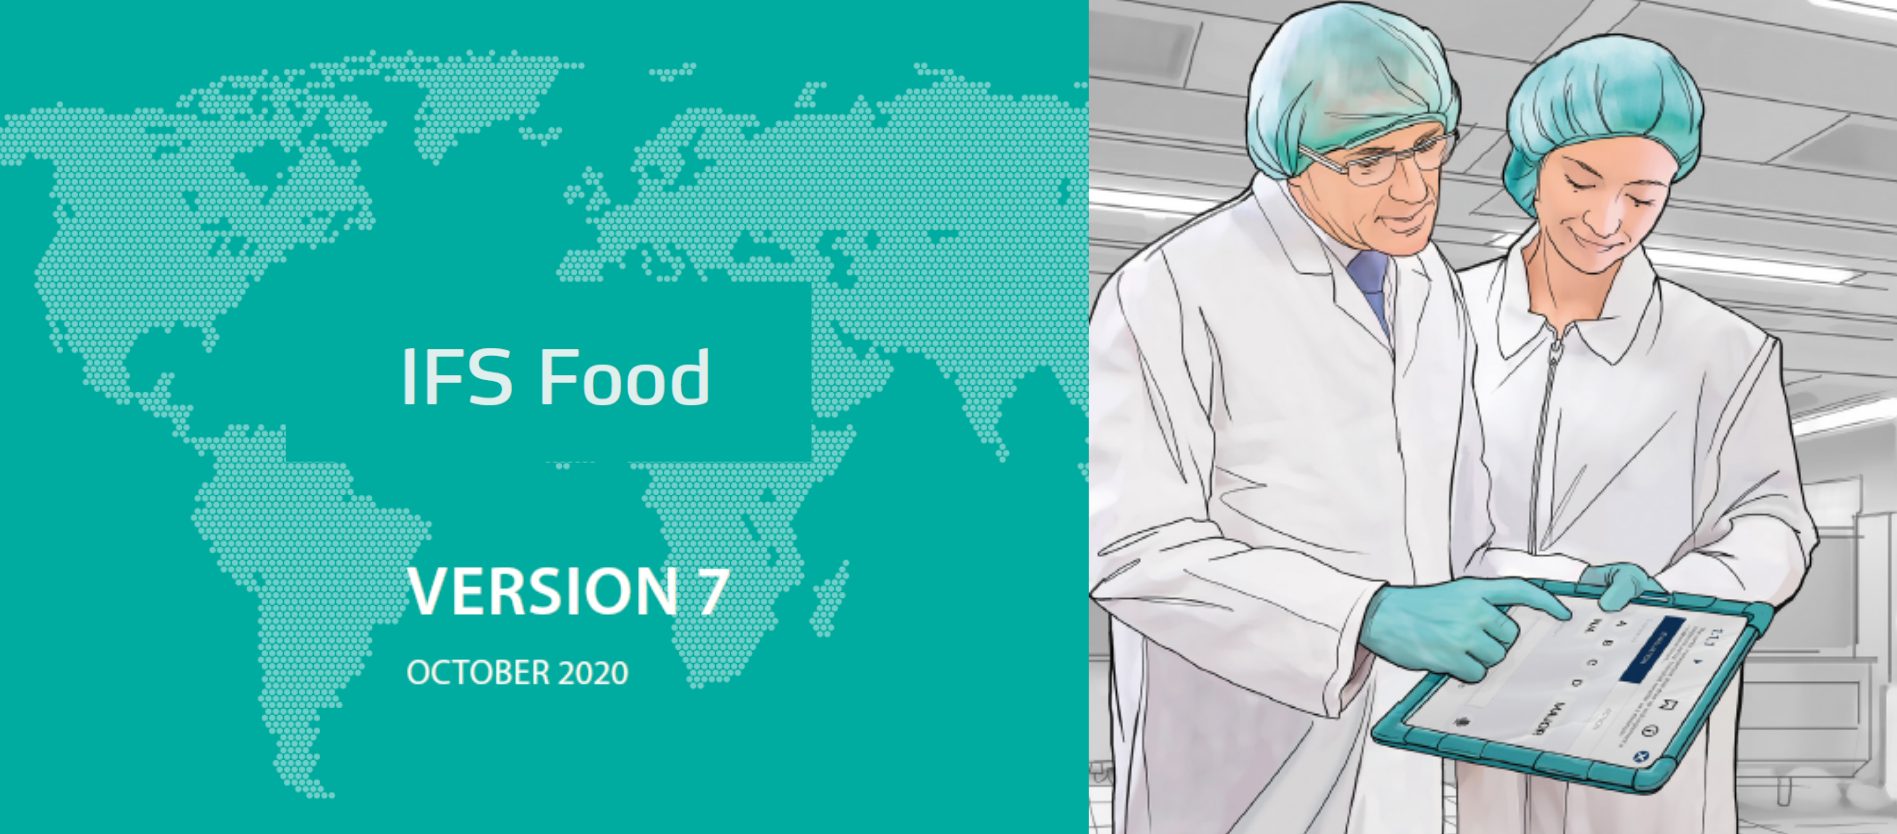 IFS Food version 7 and Food Safety Culture